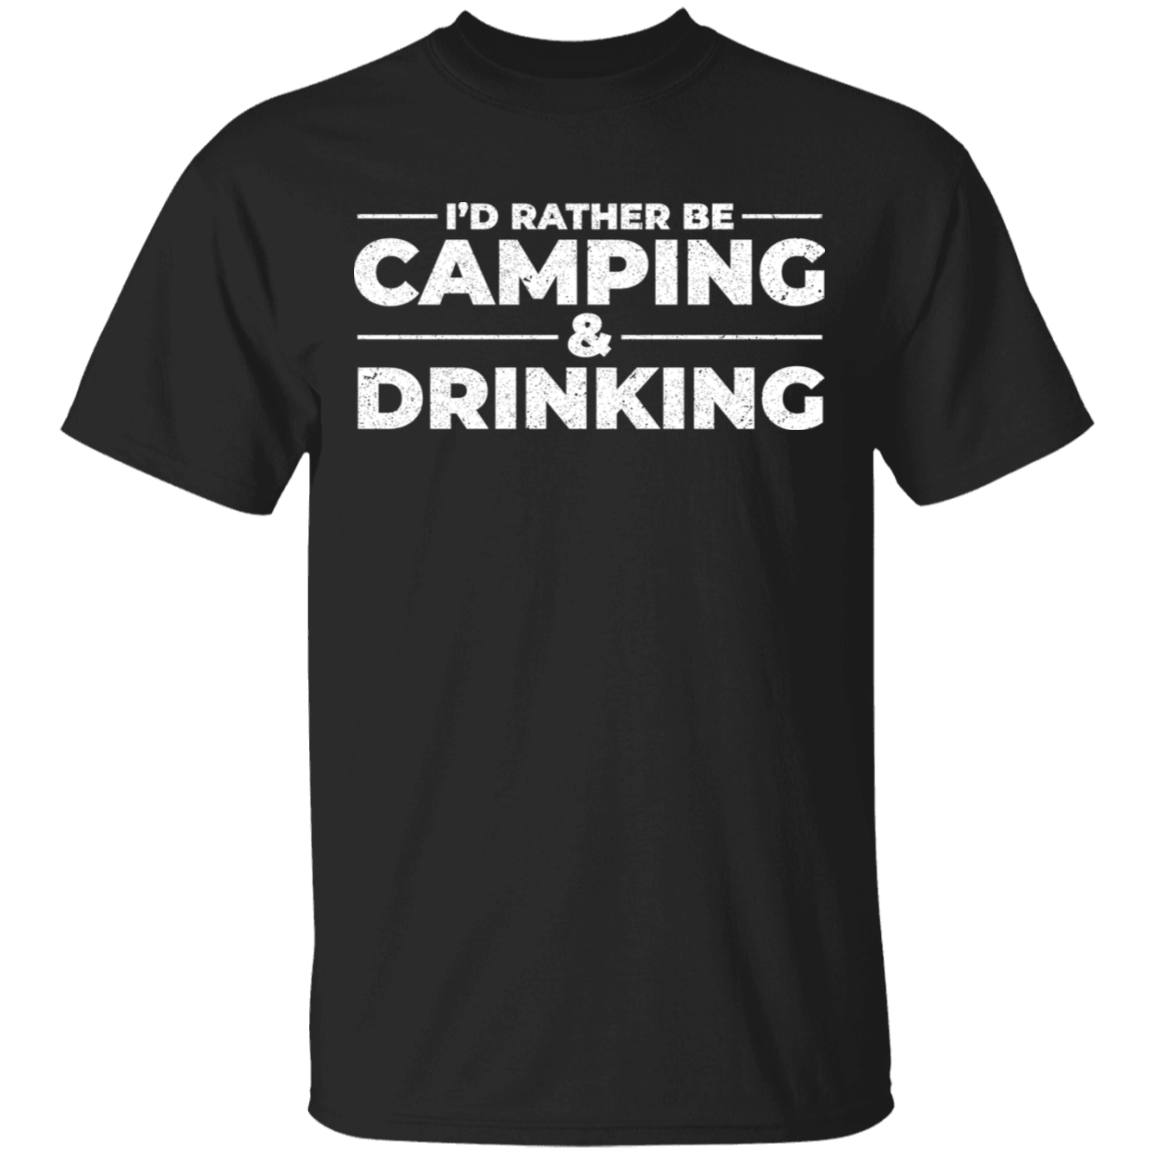 I'd Rather Be Camping & Drinking T-Shirt Apparel - The Beer Lodge